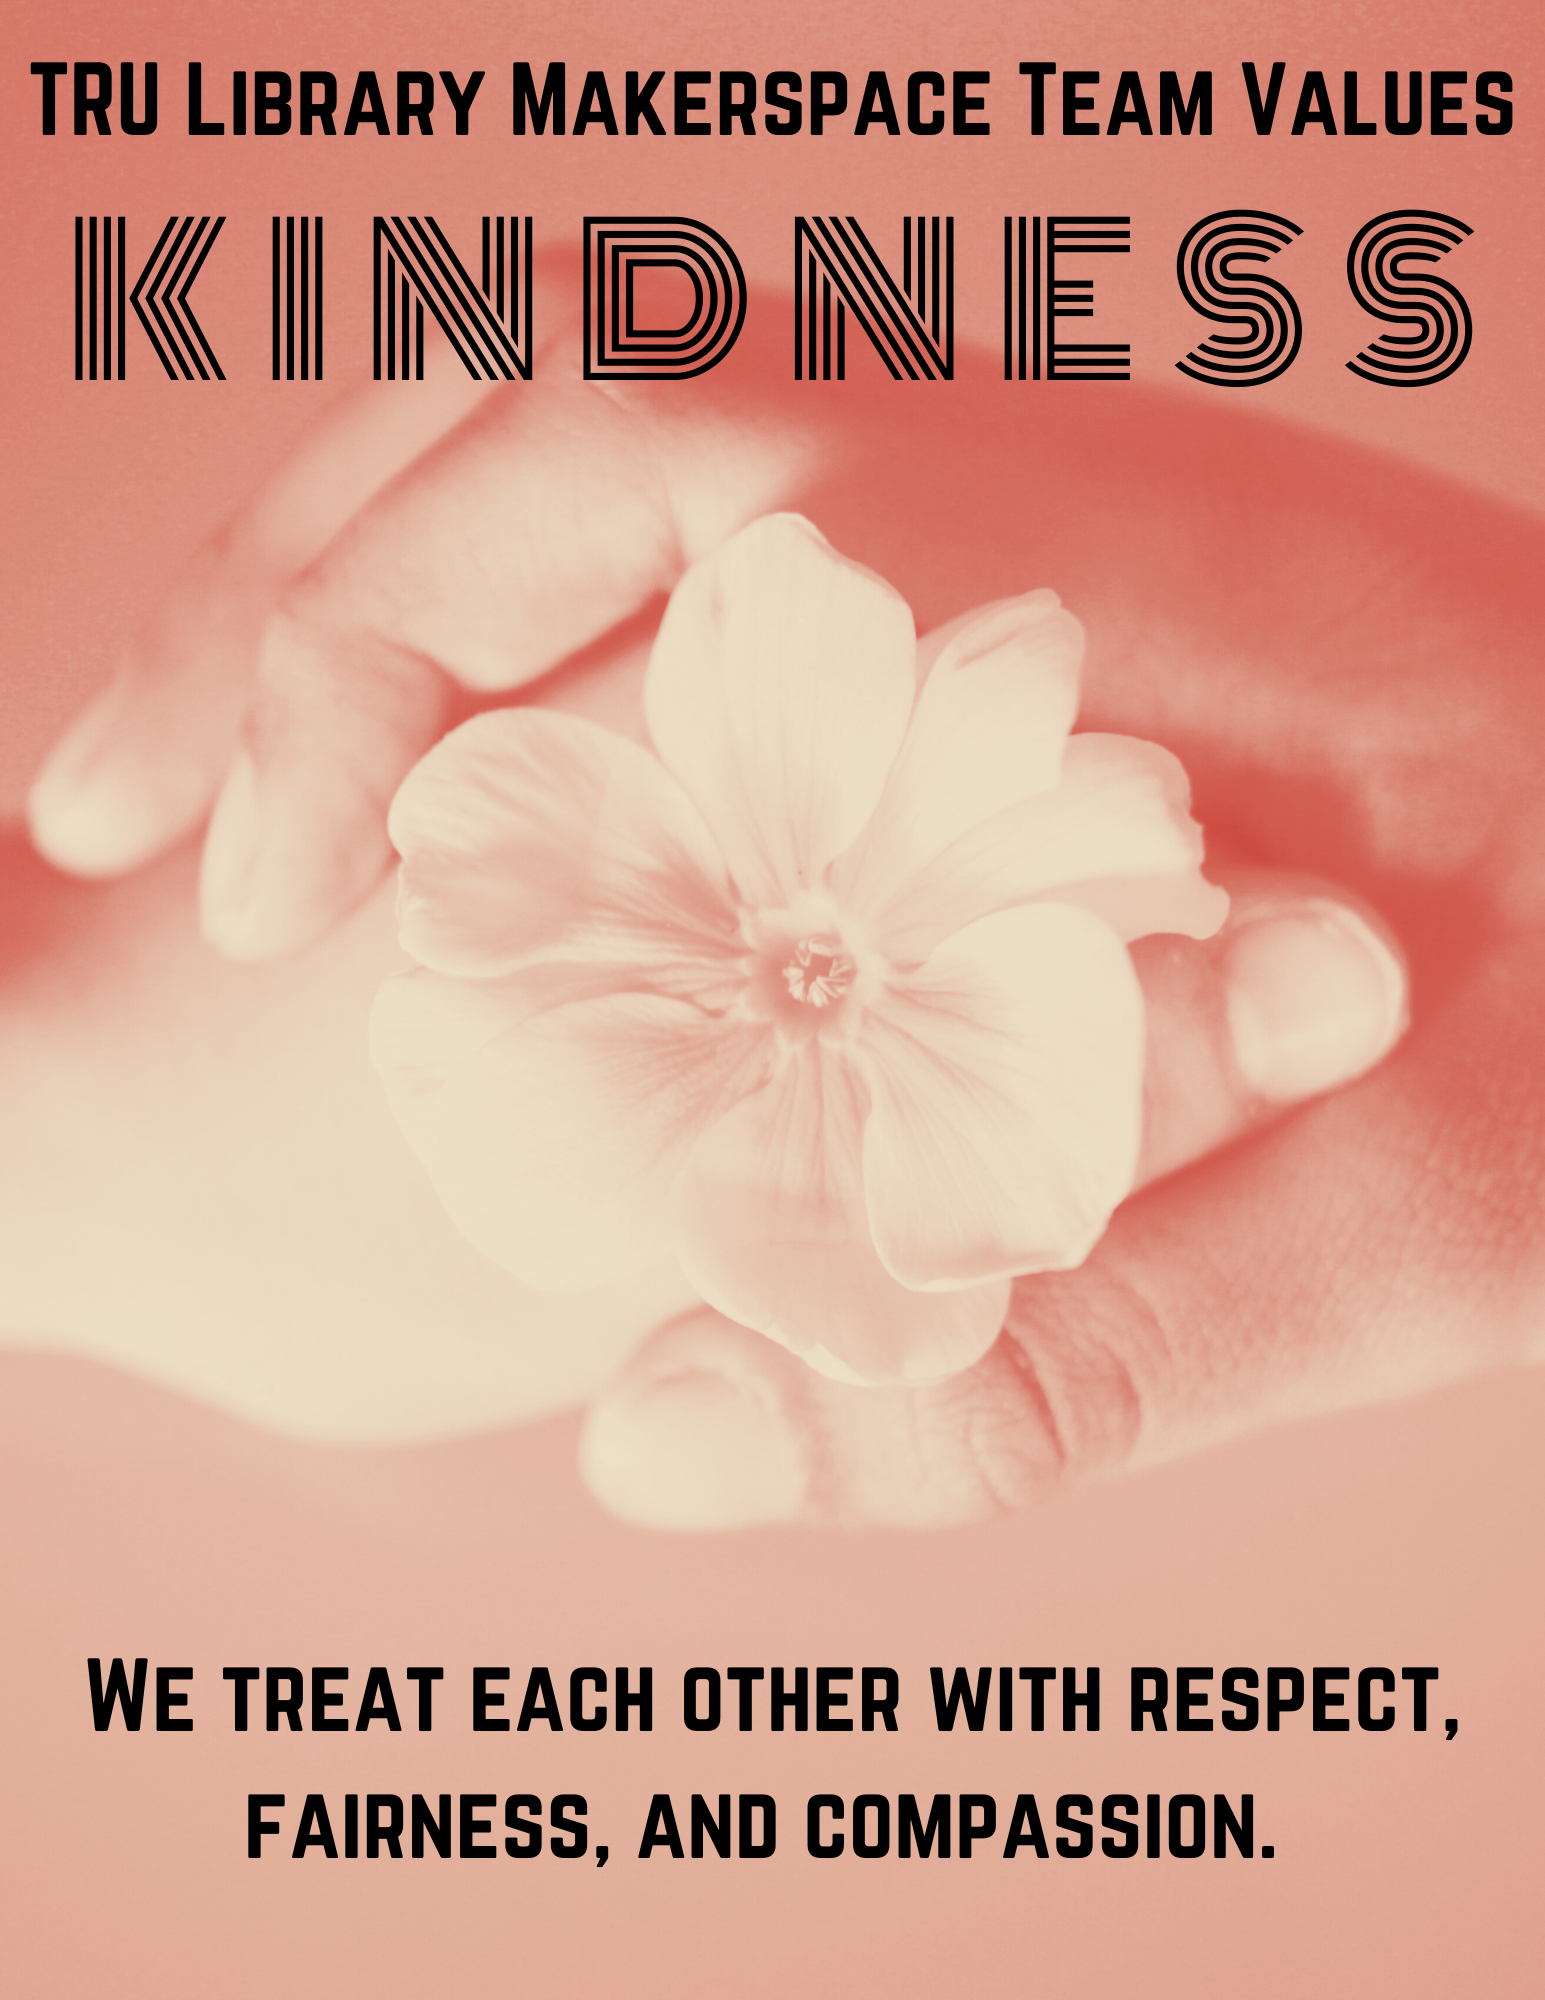 Kindness: We treat each other with respect, fairness, and compassion.